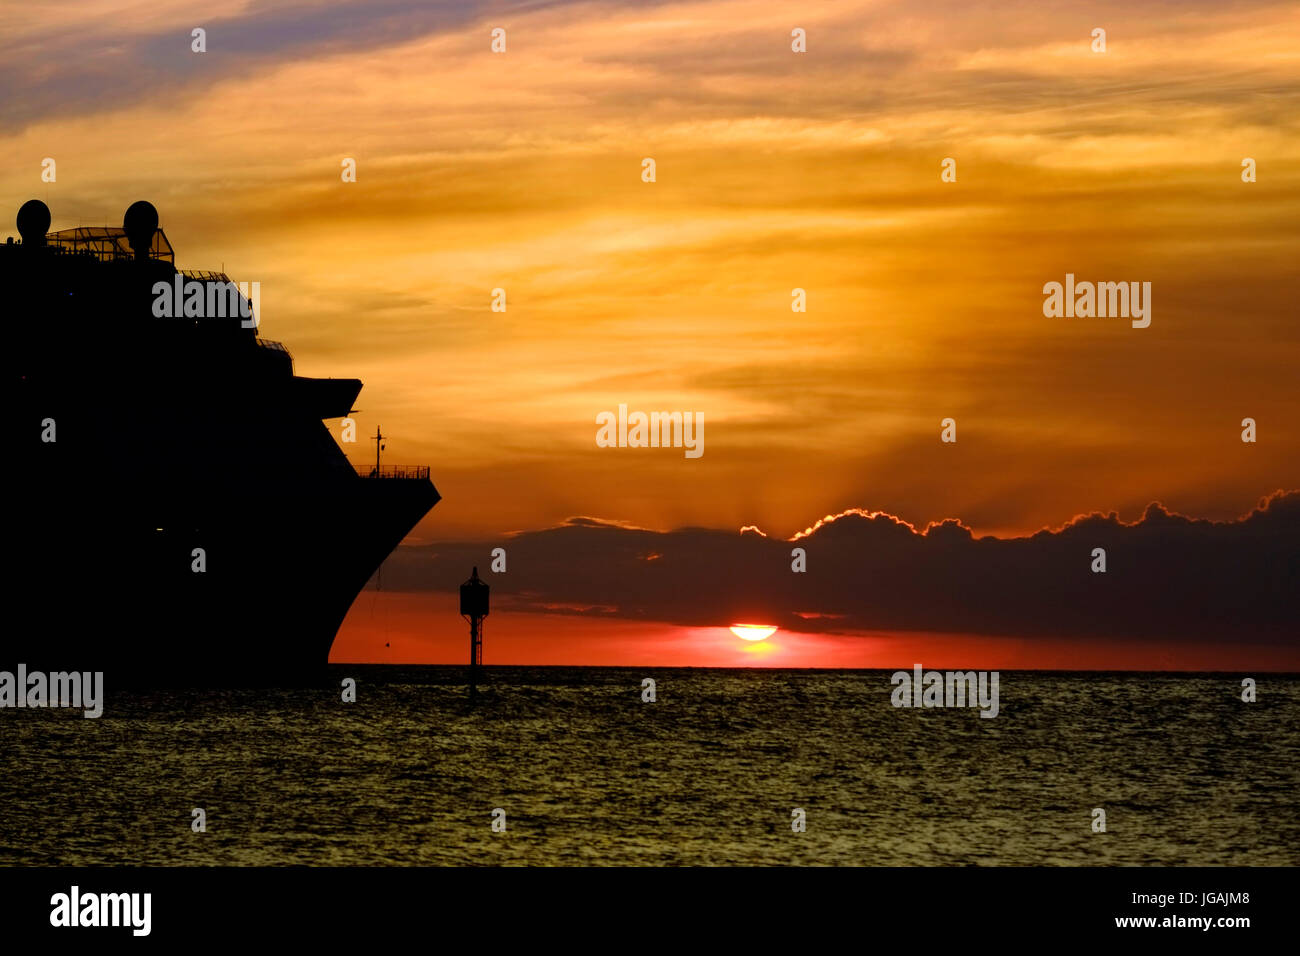 Willemstad, Curacao, Netherlands Antilles, Caribbean sunset on cruise ship silhouette Stock Photo